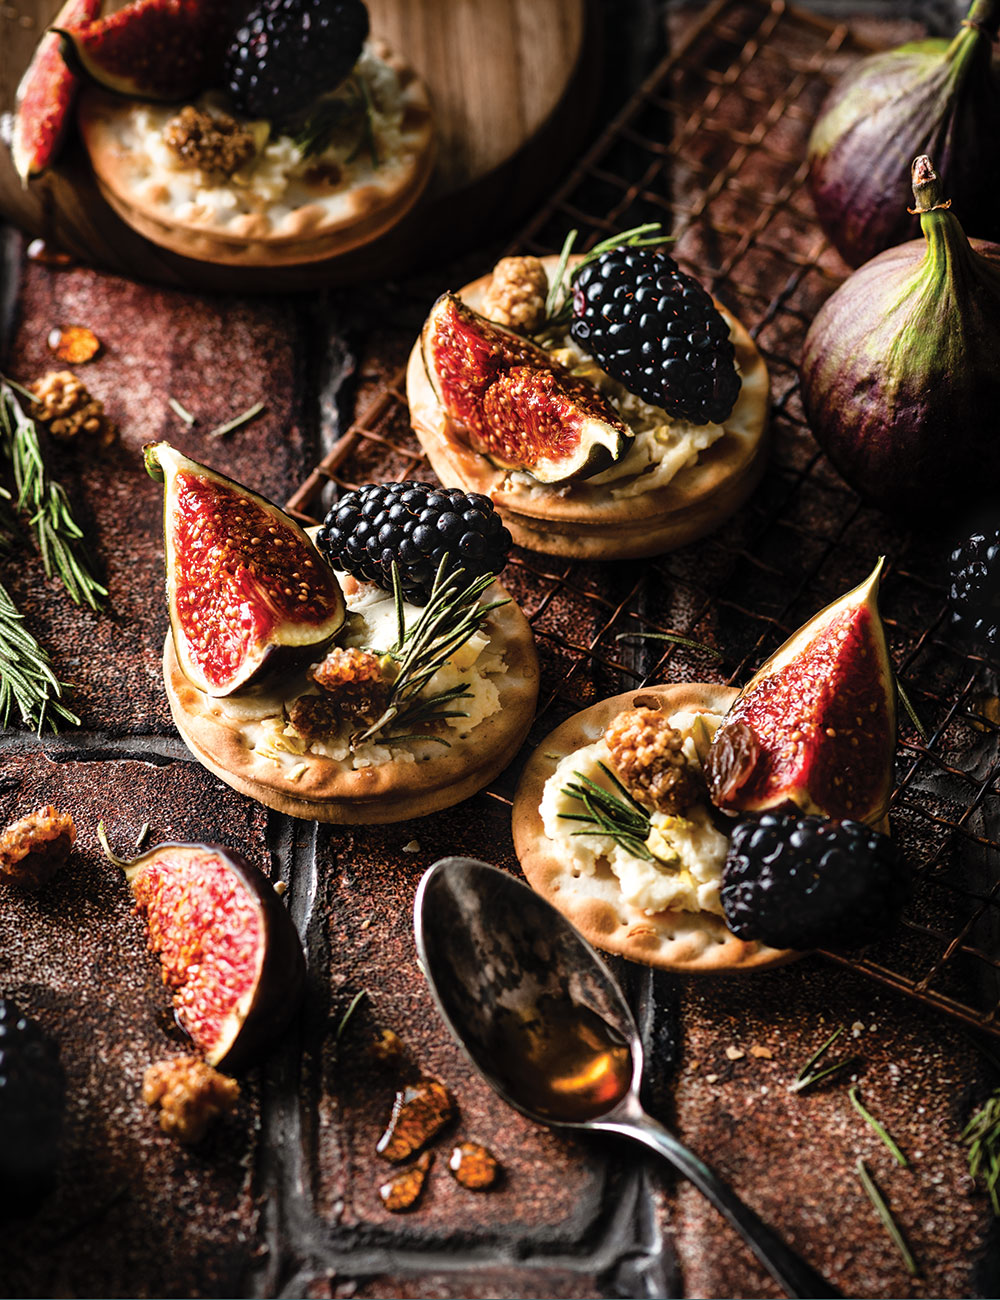 Close up photo of small circular matza-like cracker appetizers sitting on a dark brick surface. Each cracker is a light golden brown and is artfully decorated with hummus, small sprigs of green thyme, dark blackish purple blackberries, and quarter slices of bright pinkish red figs. 